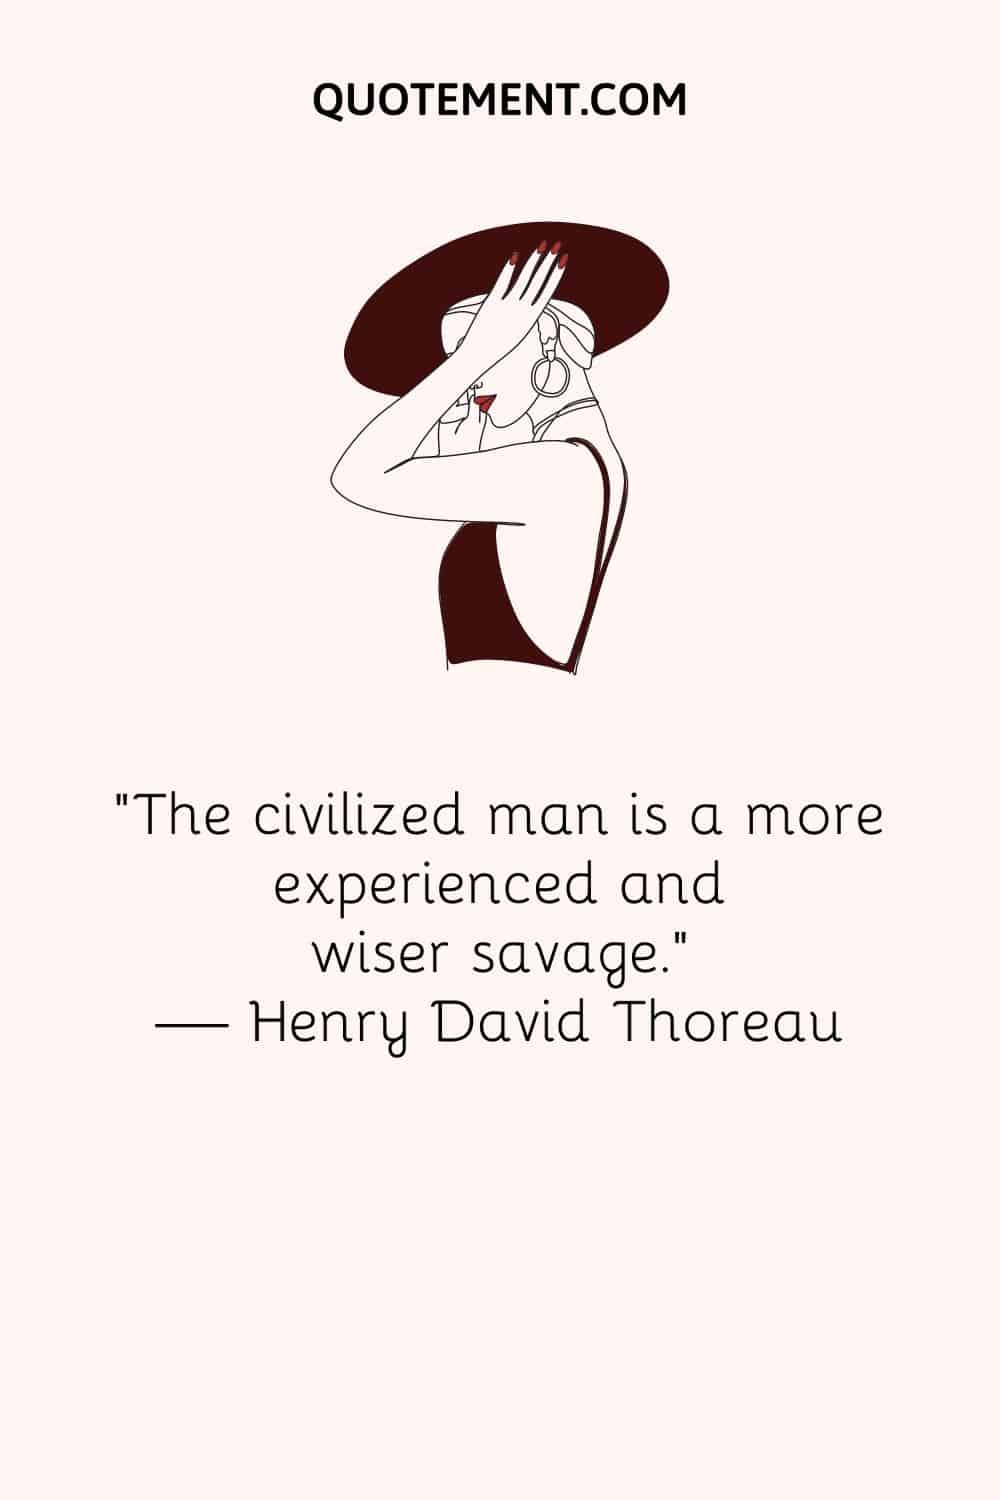 “The civilized man is a more experienced and wiser savage.” — Henry David Thoreau